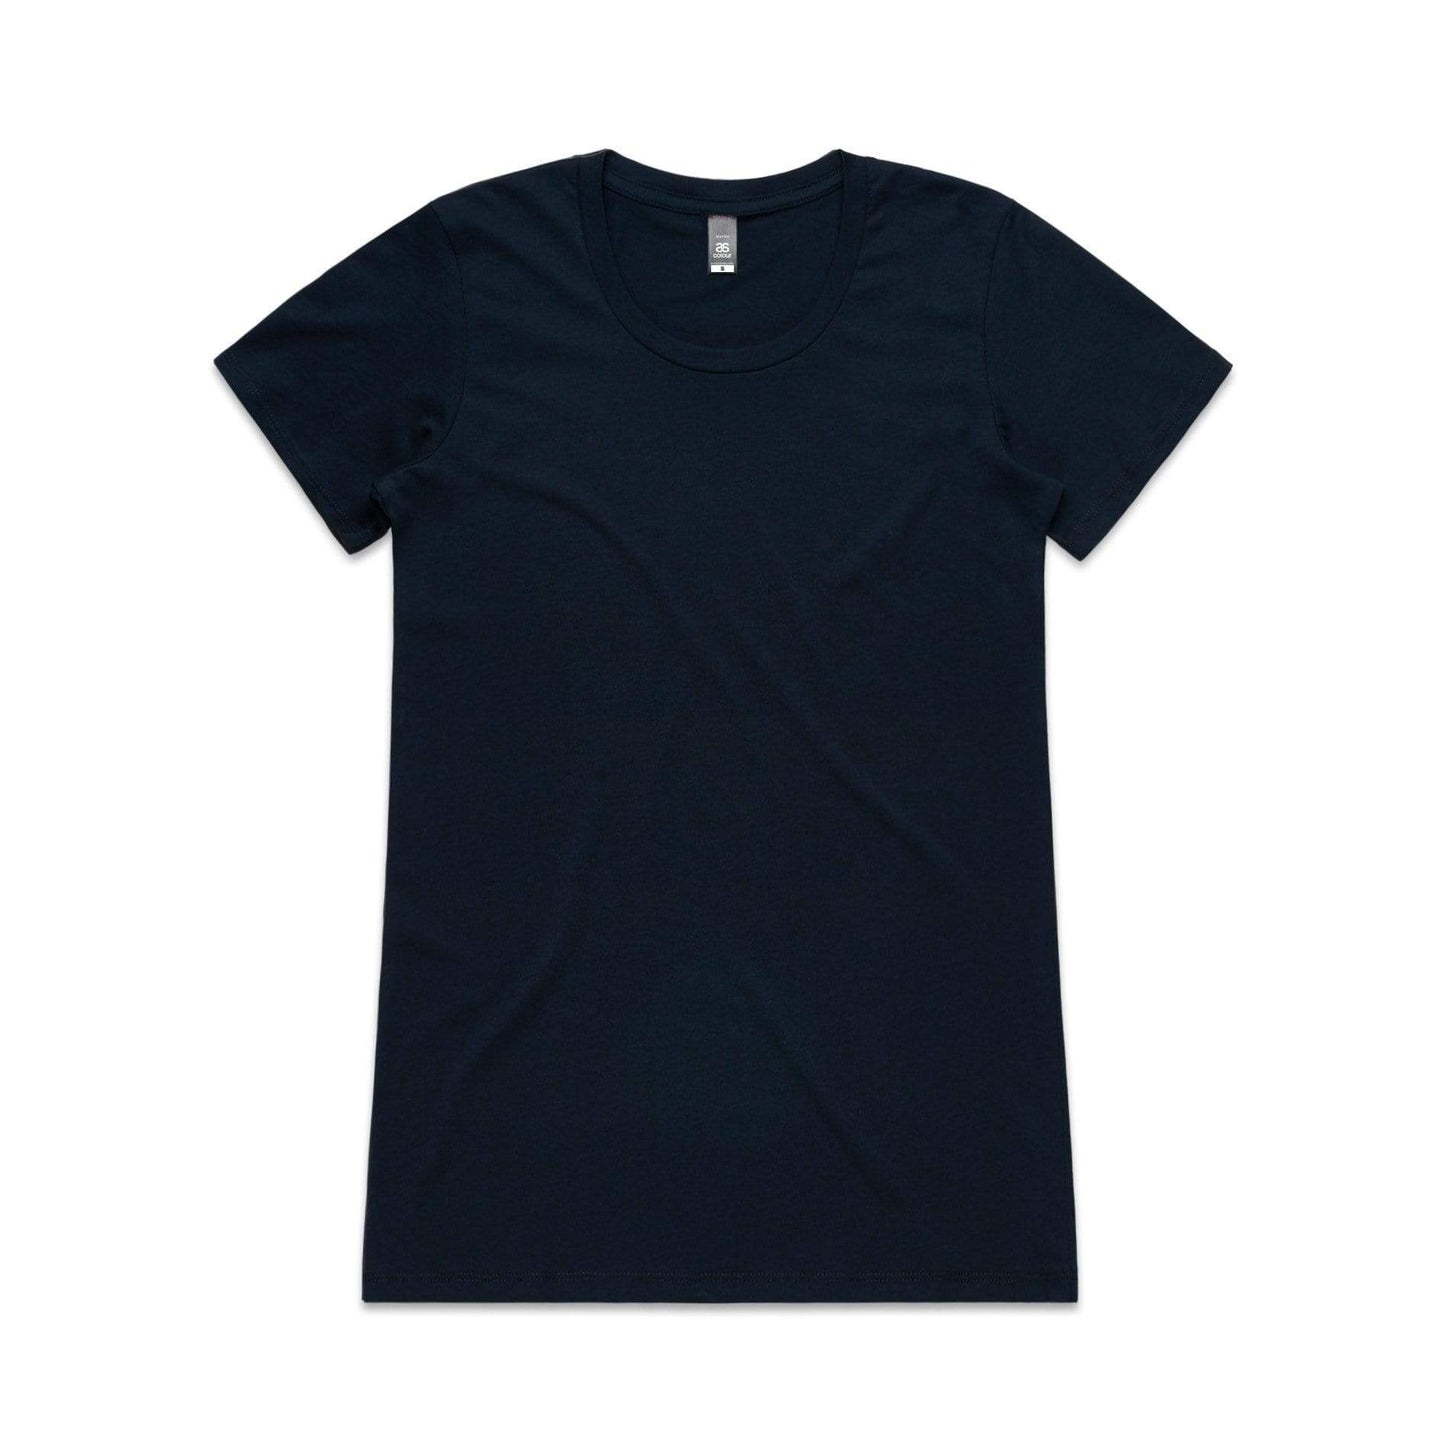 Printed As Colour Women's Wafer tee 4002 Casual Wear As Colour NAVY XSM 